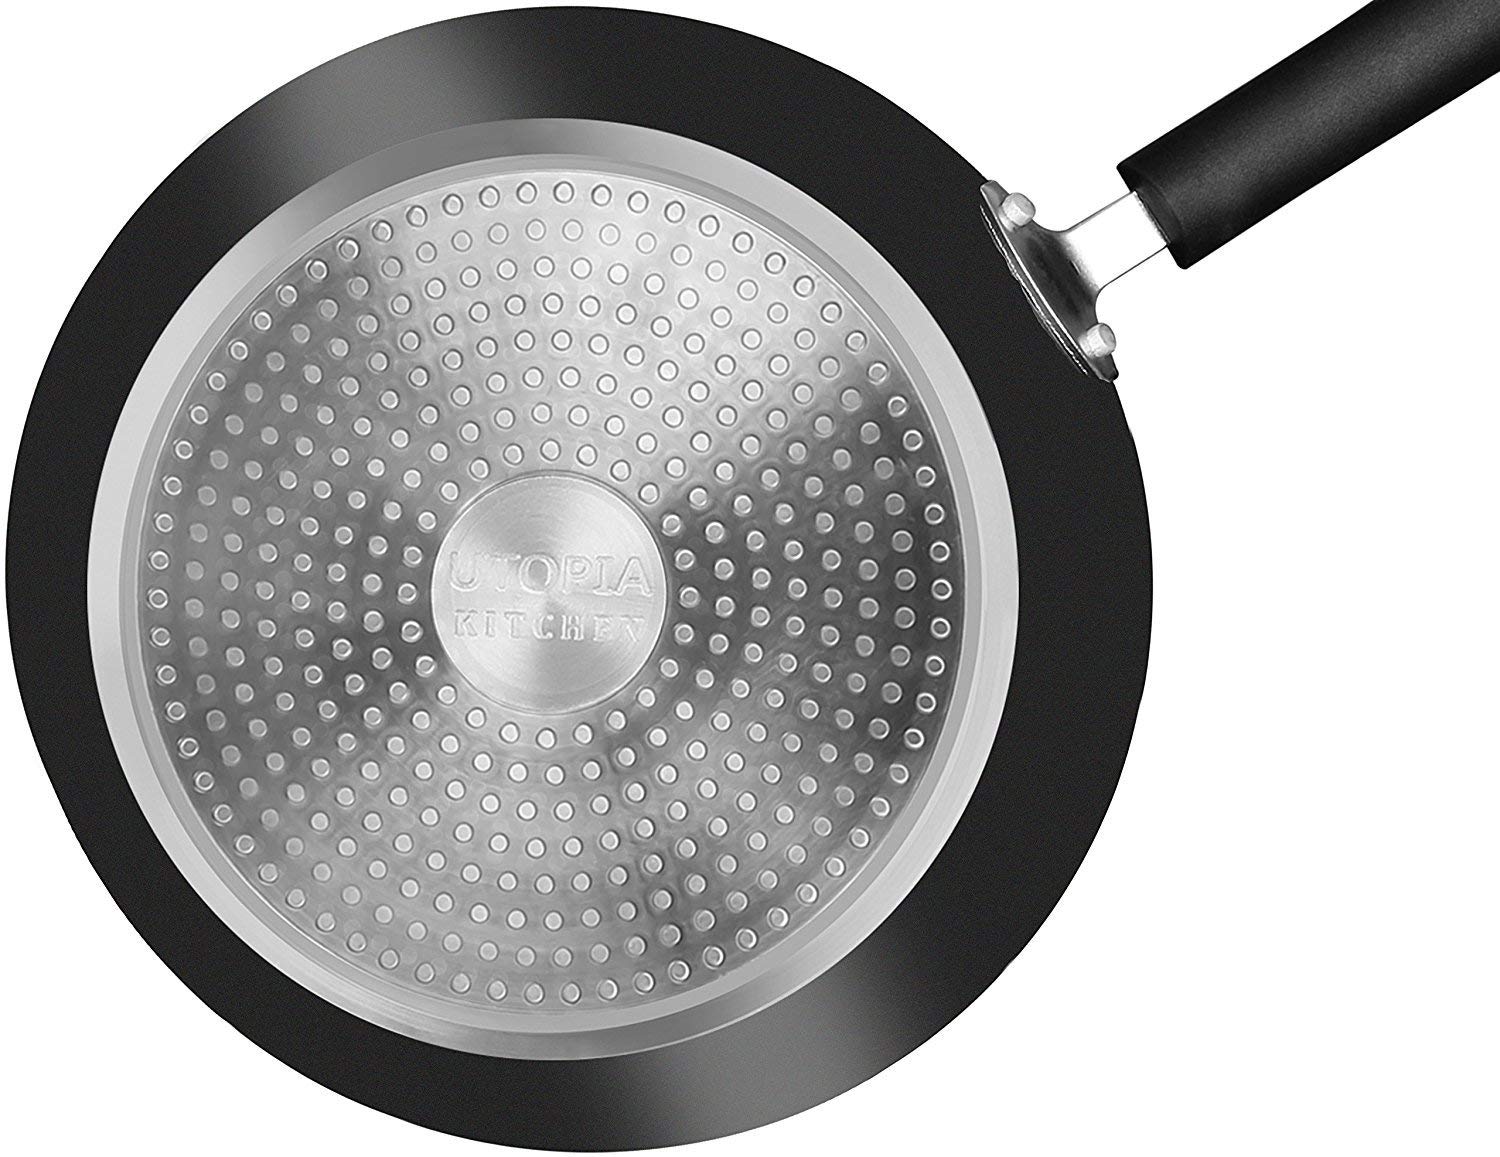 Non-stick Frying Pan Set - 3 Pieces (8 Inch / 9.5 Inch / 11 Inch